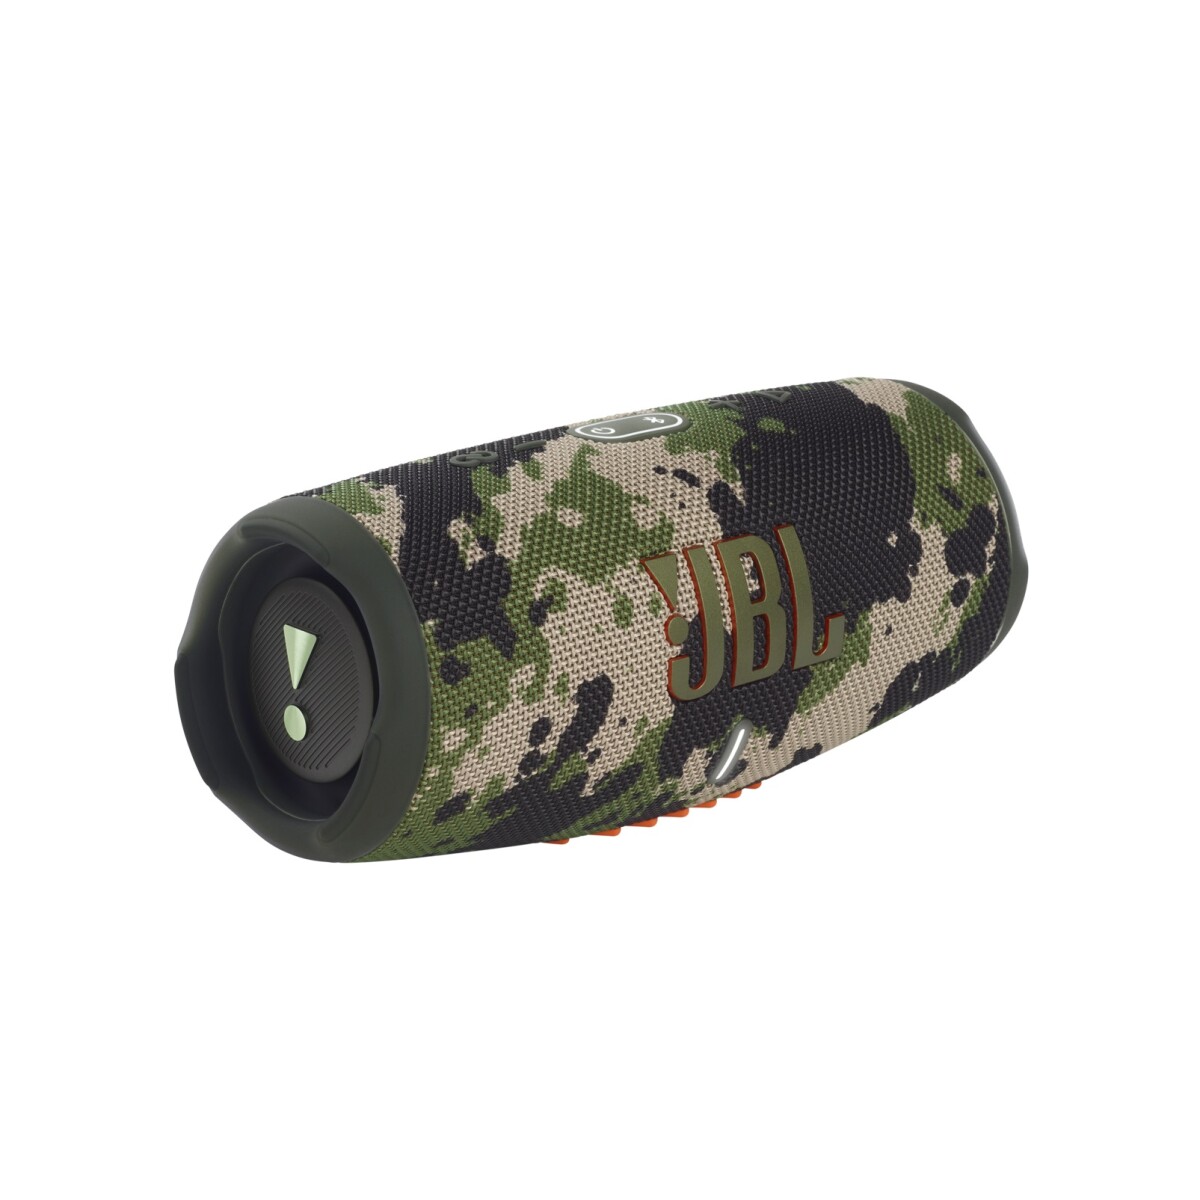 JBL CHARGE 5,PORTABLE BLUETOOTH SPEAKER (CAMOUFLAGE) - 001 